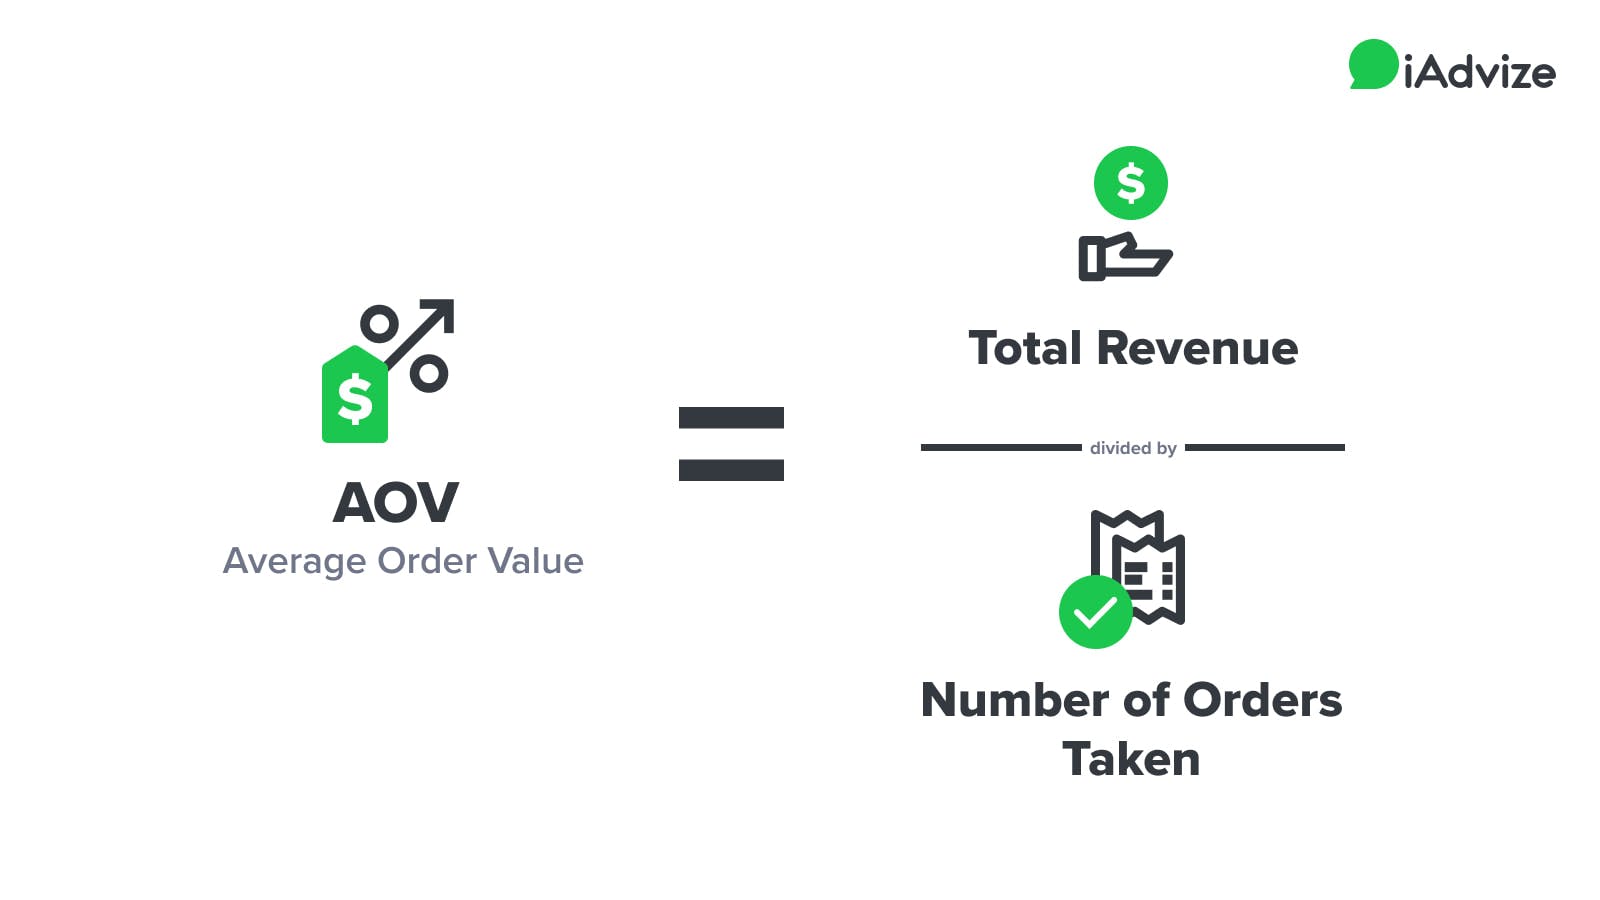 How Do You Calculate Average Order Value?